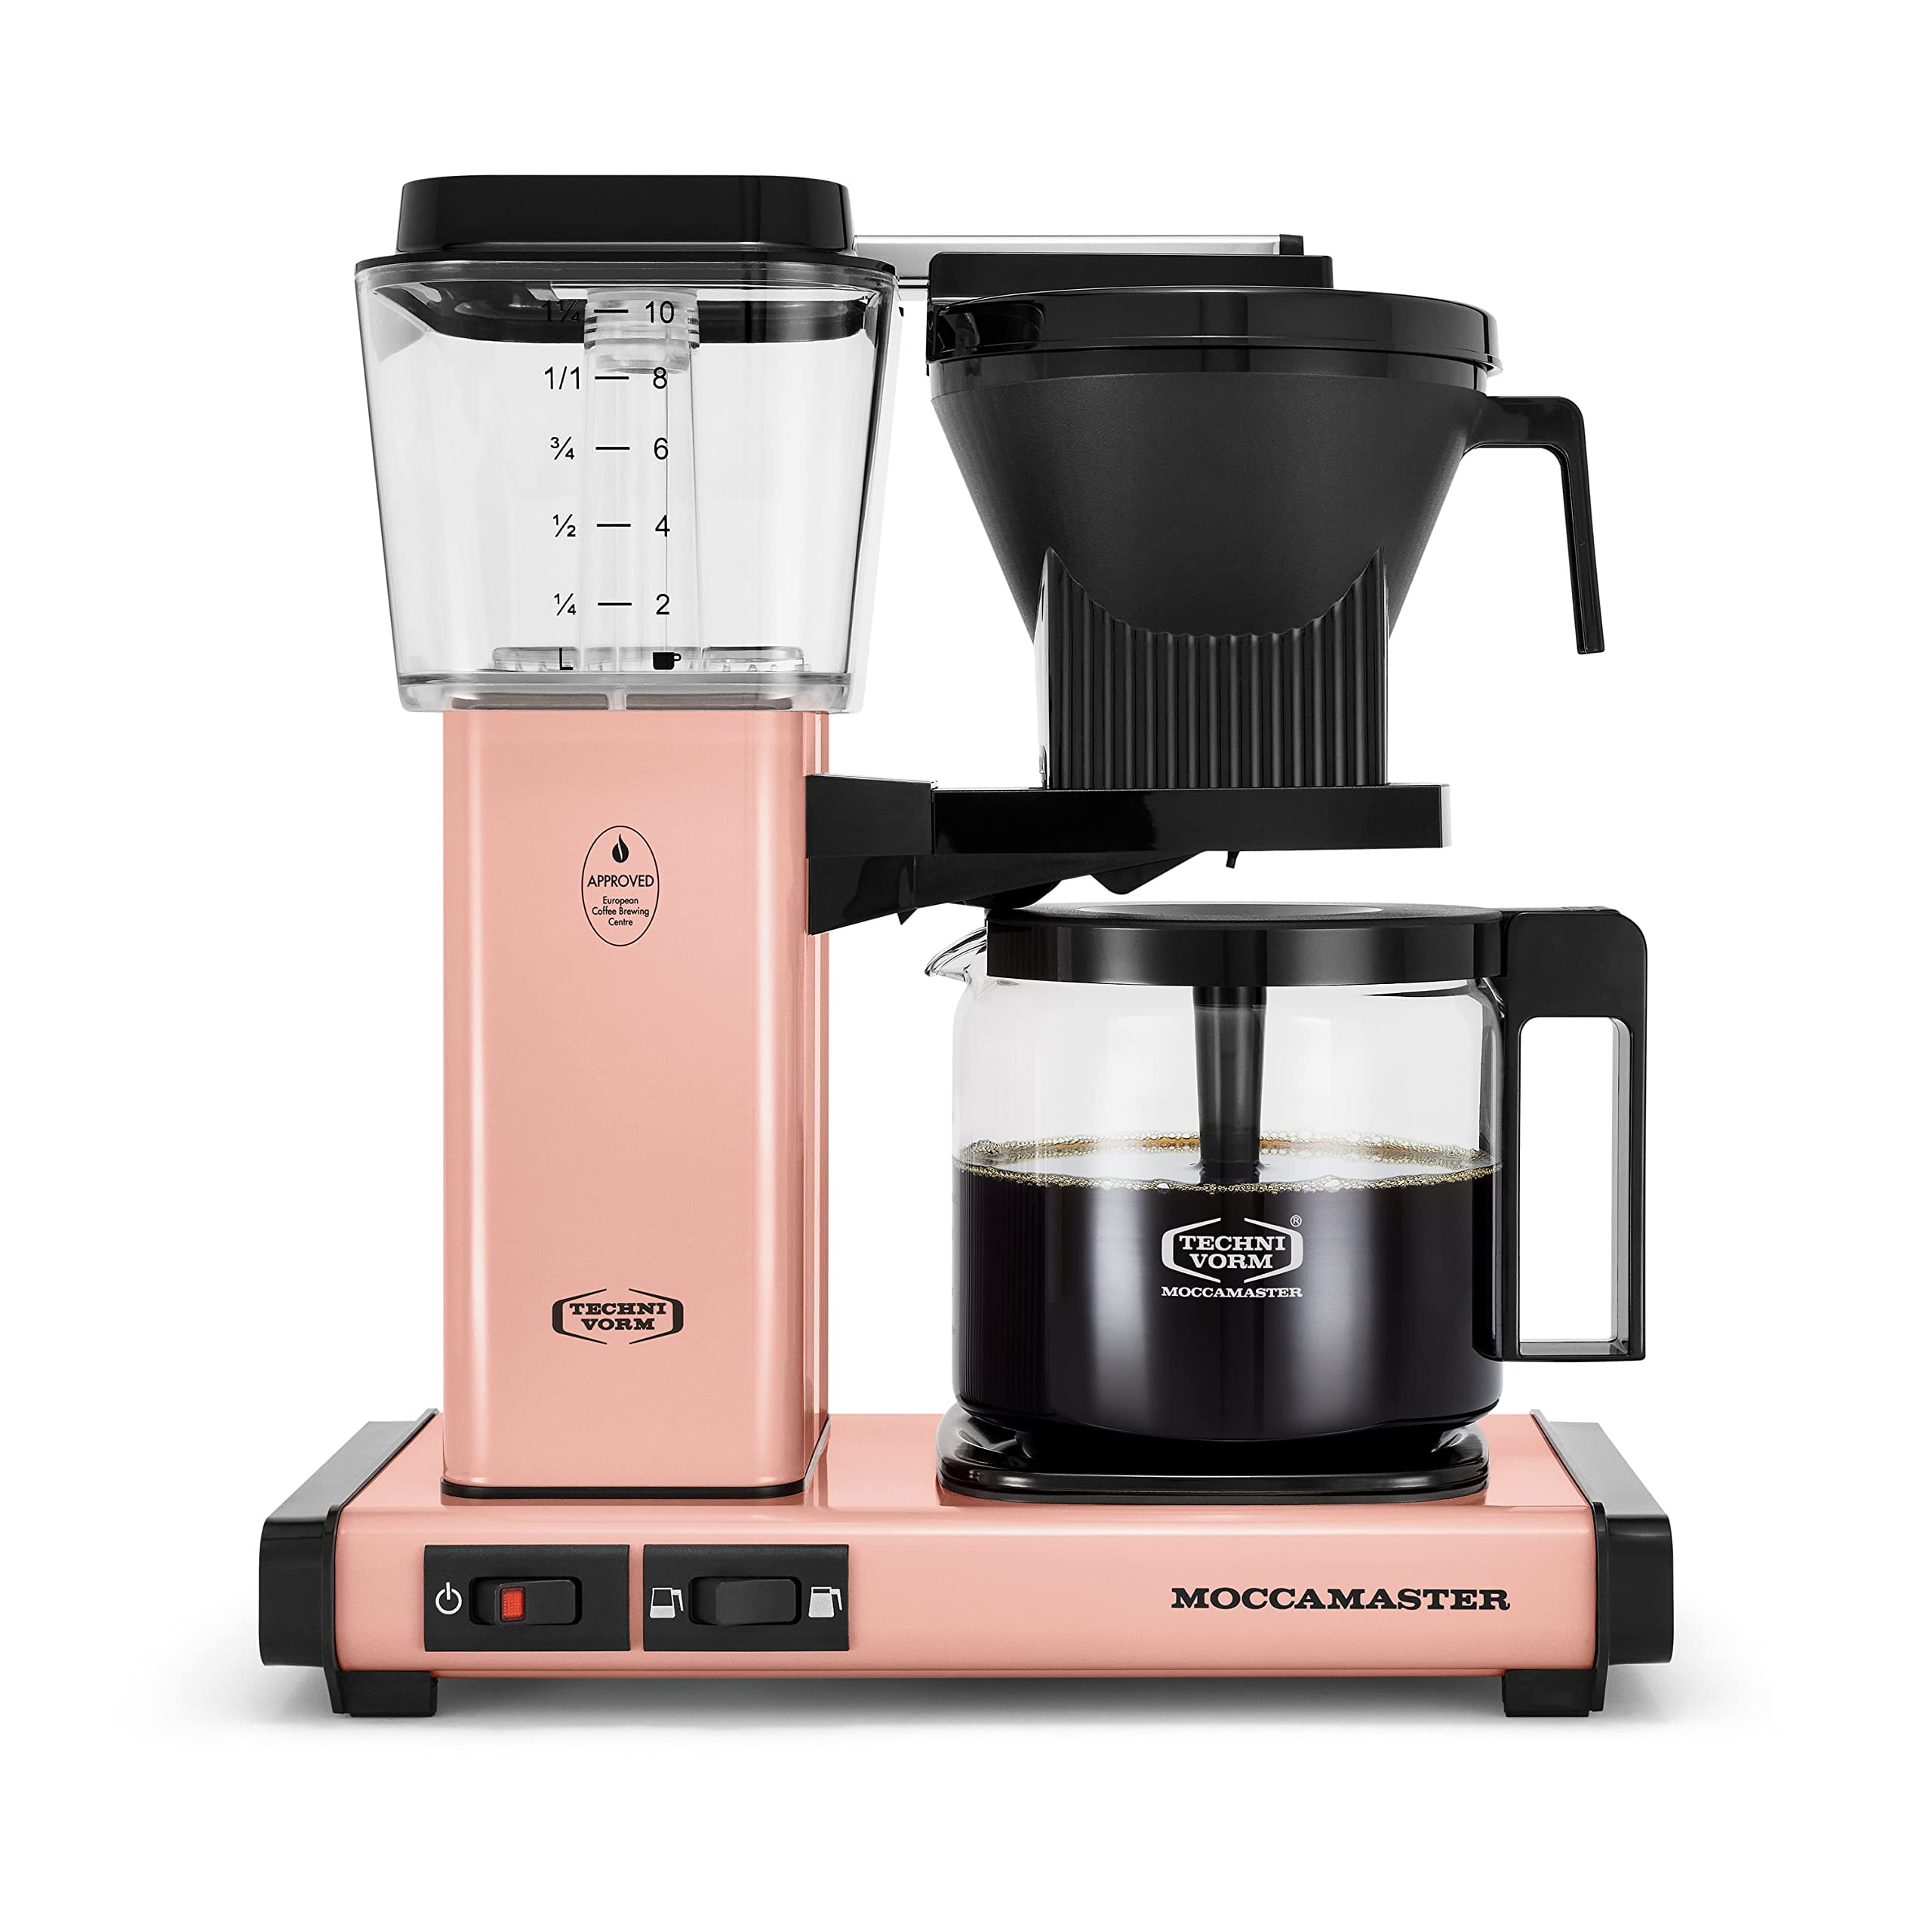 Technivorm Moccamaster KBGC 741 AO review: Premium, colorful coffee machine  doesn't fulfill its potential - CNET